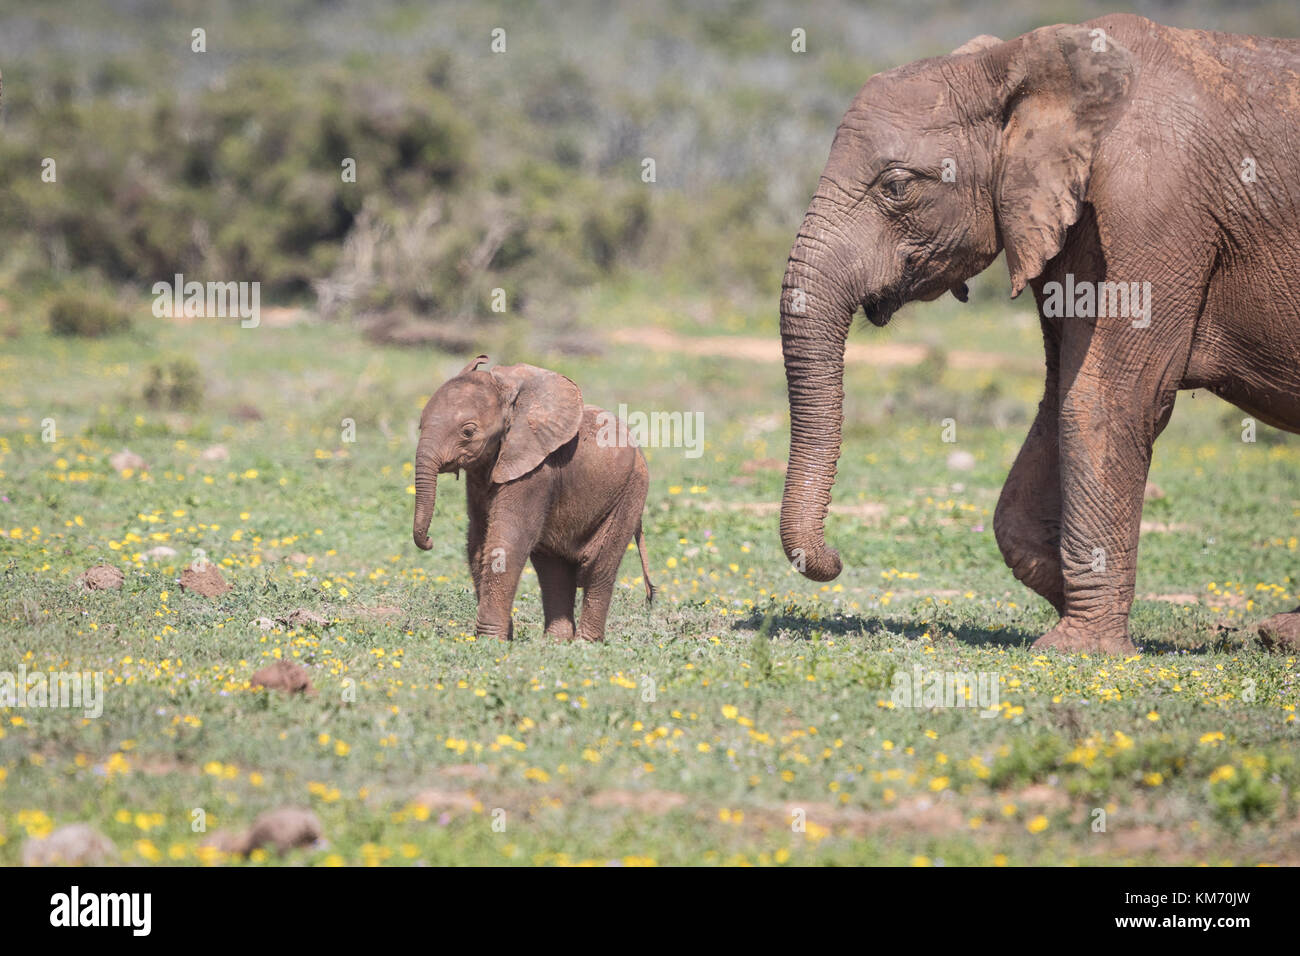 A  young baby elephant walks across a green field of spring flowers, closely followed by its protective mother, Eastern Cape, South Africa Stock Photo